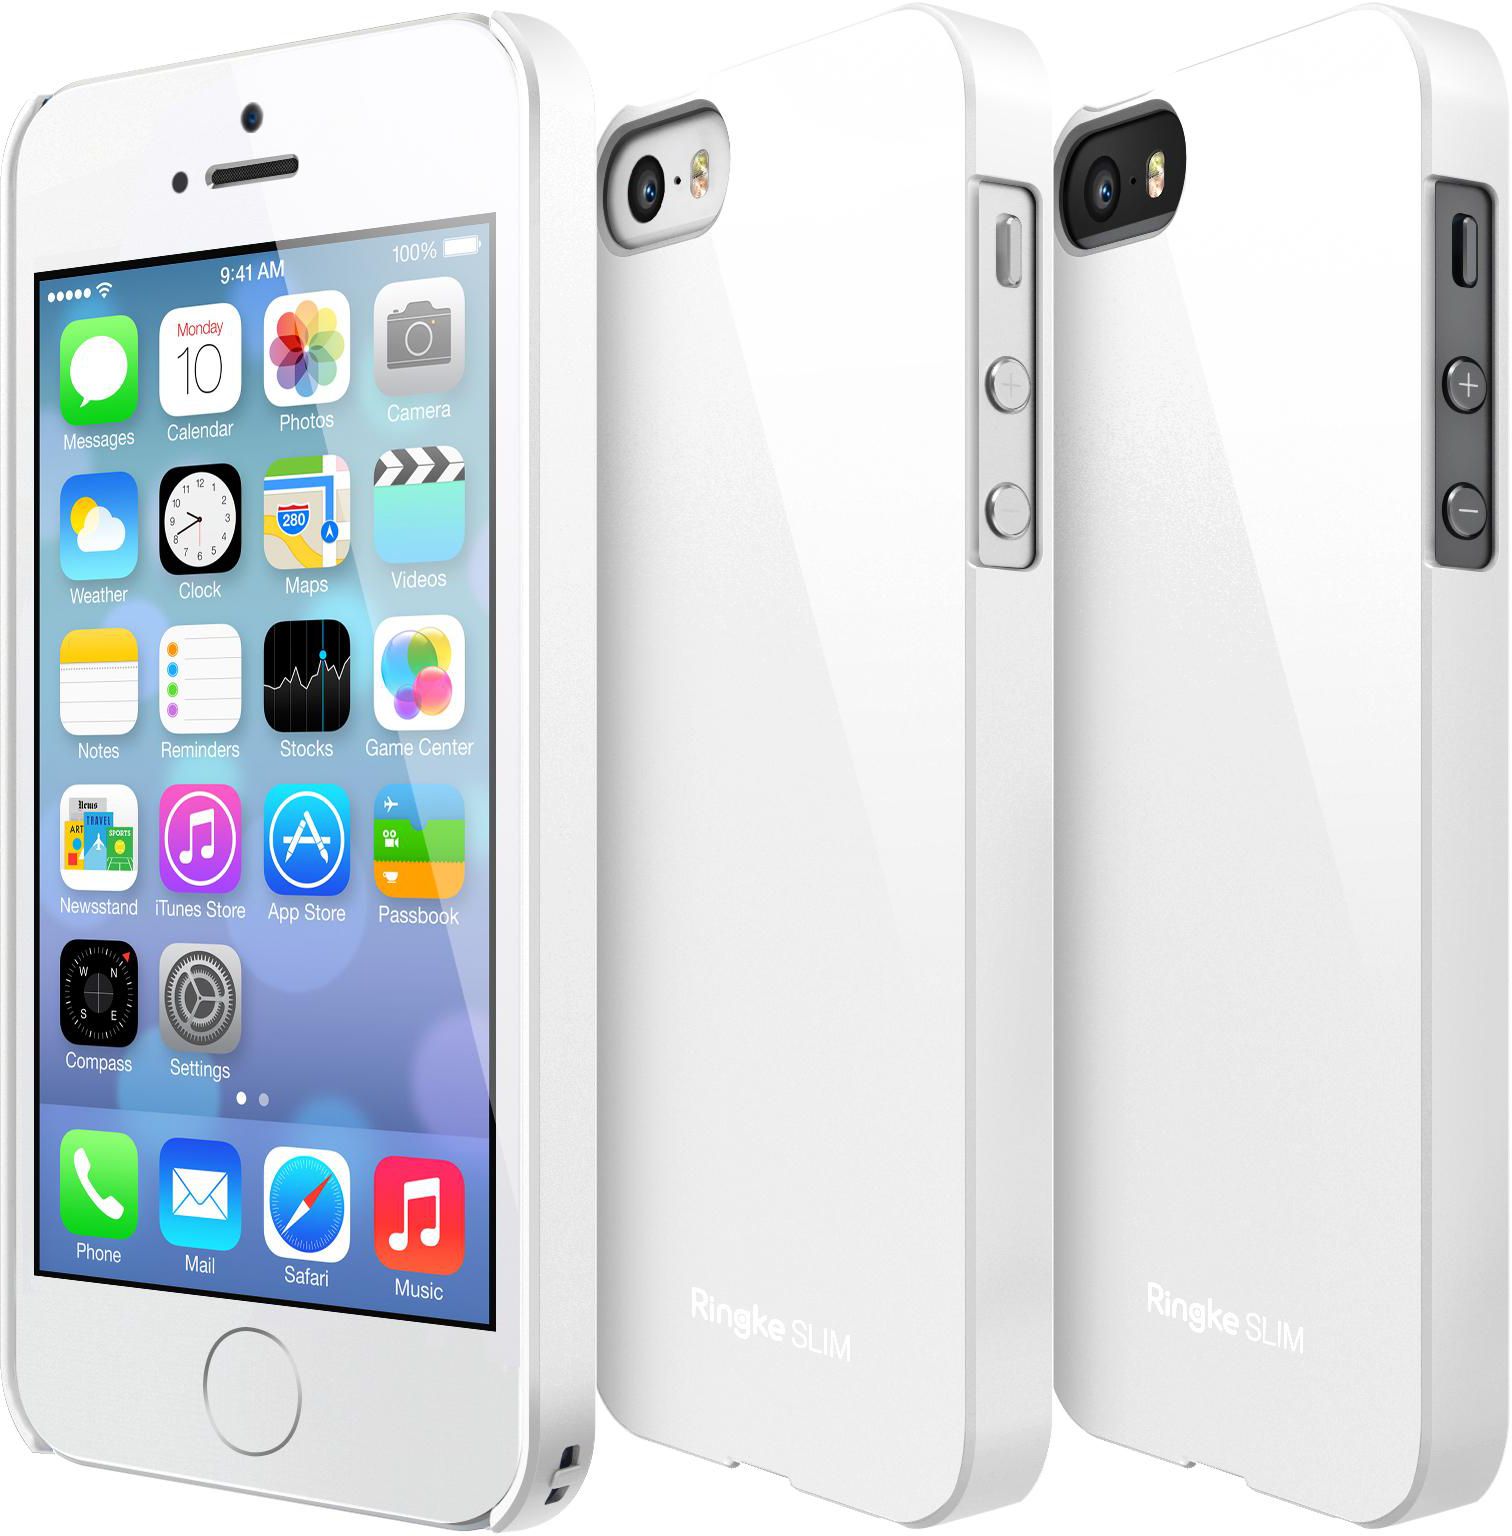 Rearth Ringke Slim Premium Dual Coated Hard Case Cover for Apple iPhone 5/5s White